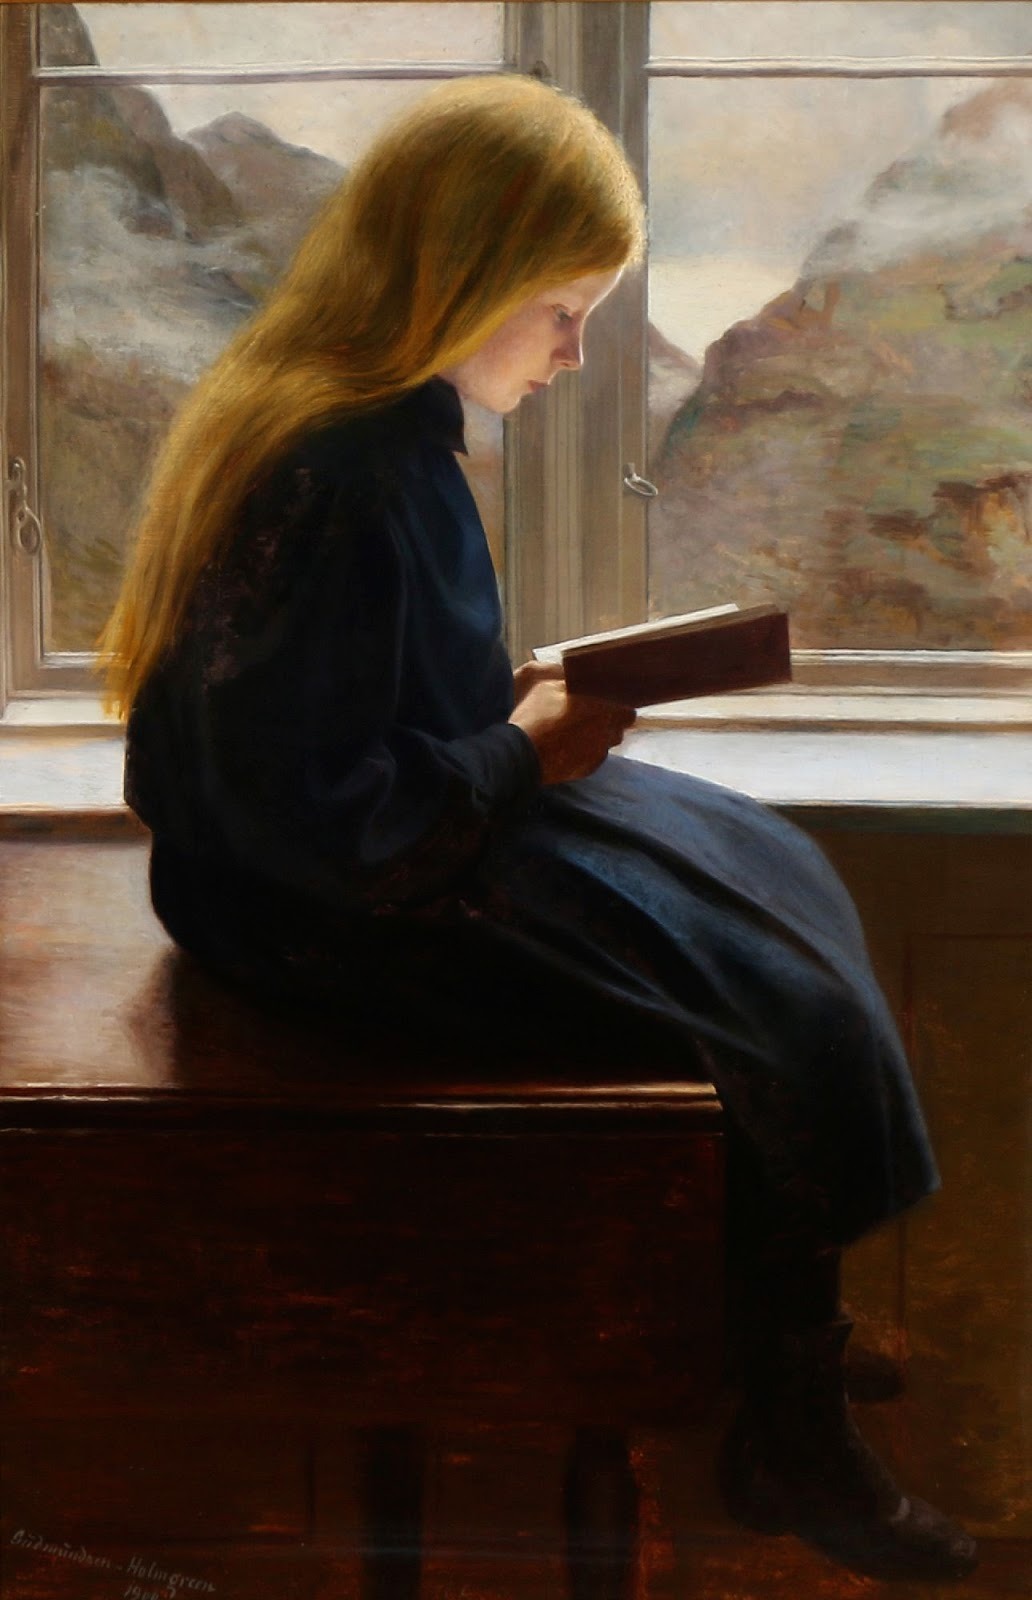 Læsende lille pige - A little girl reading (1900). Johan Gudmundsen-Holmgreen (Danish, 1858-1912). Oil on canvas.
A writer only begins a book, it is the reader who completes it; for the reader takes up where the writer left off as new thoughts stir...